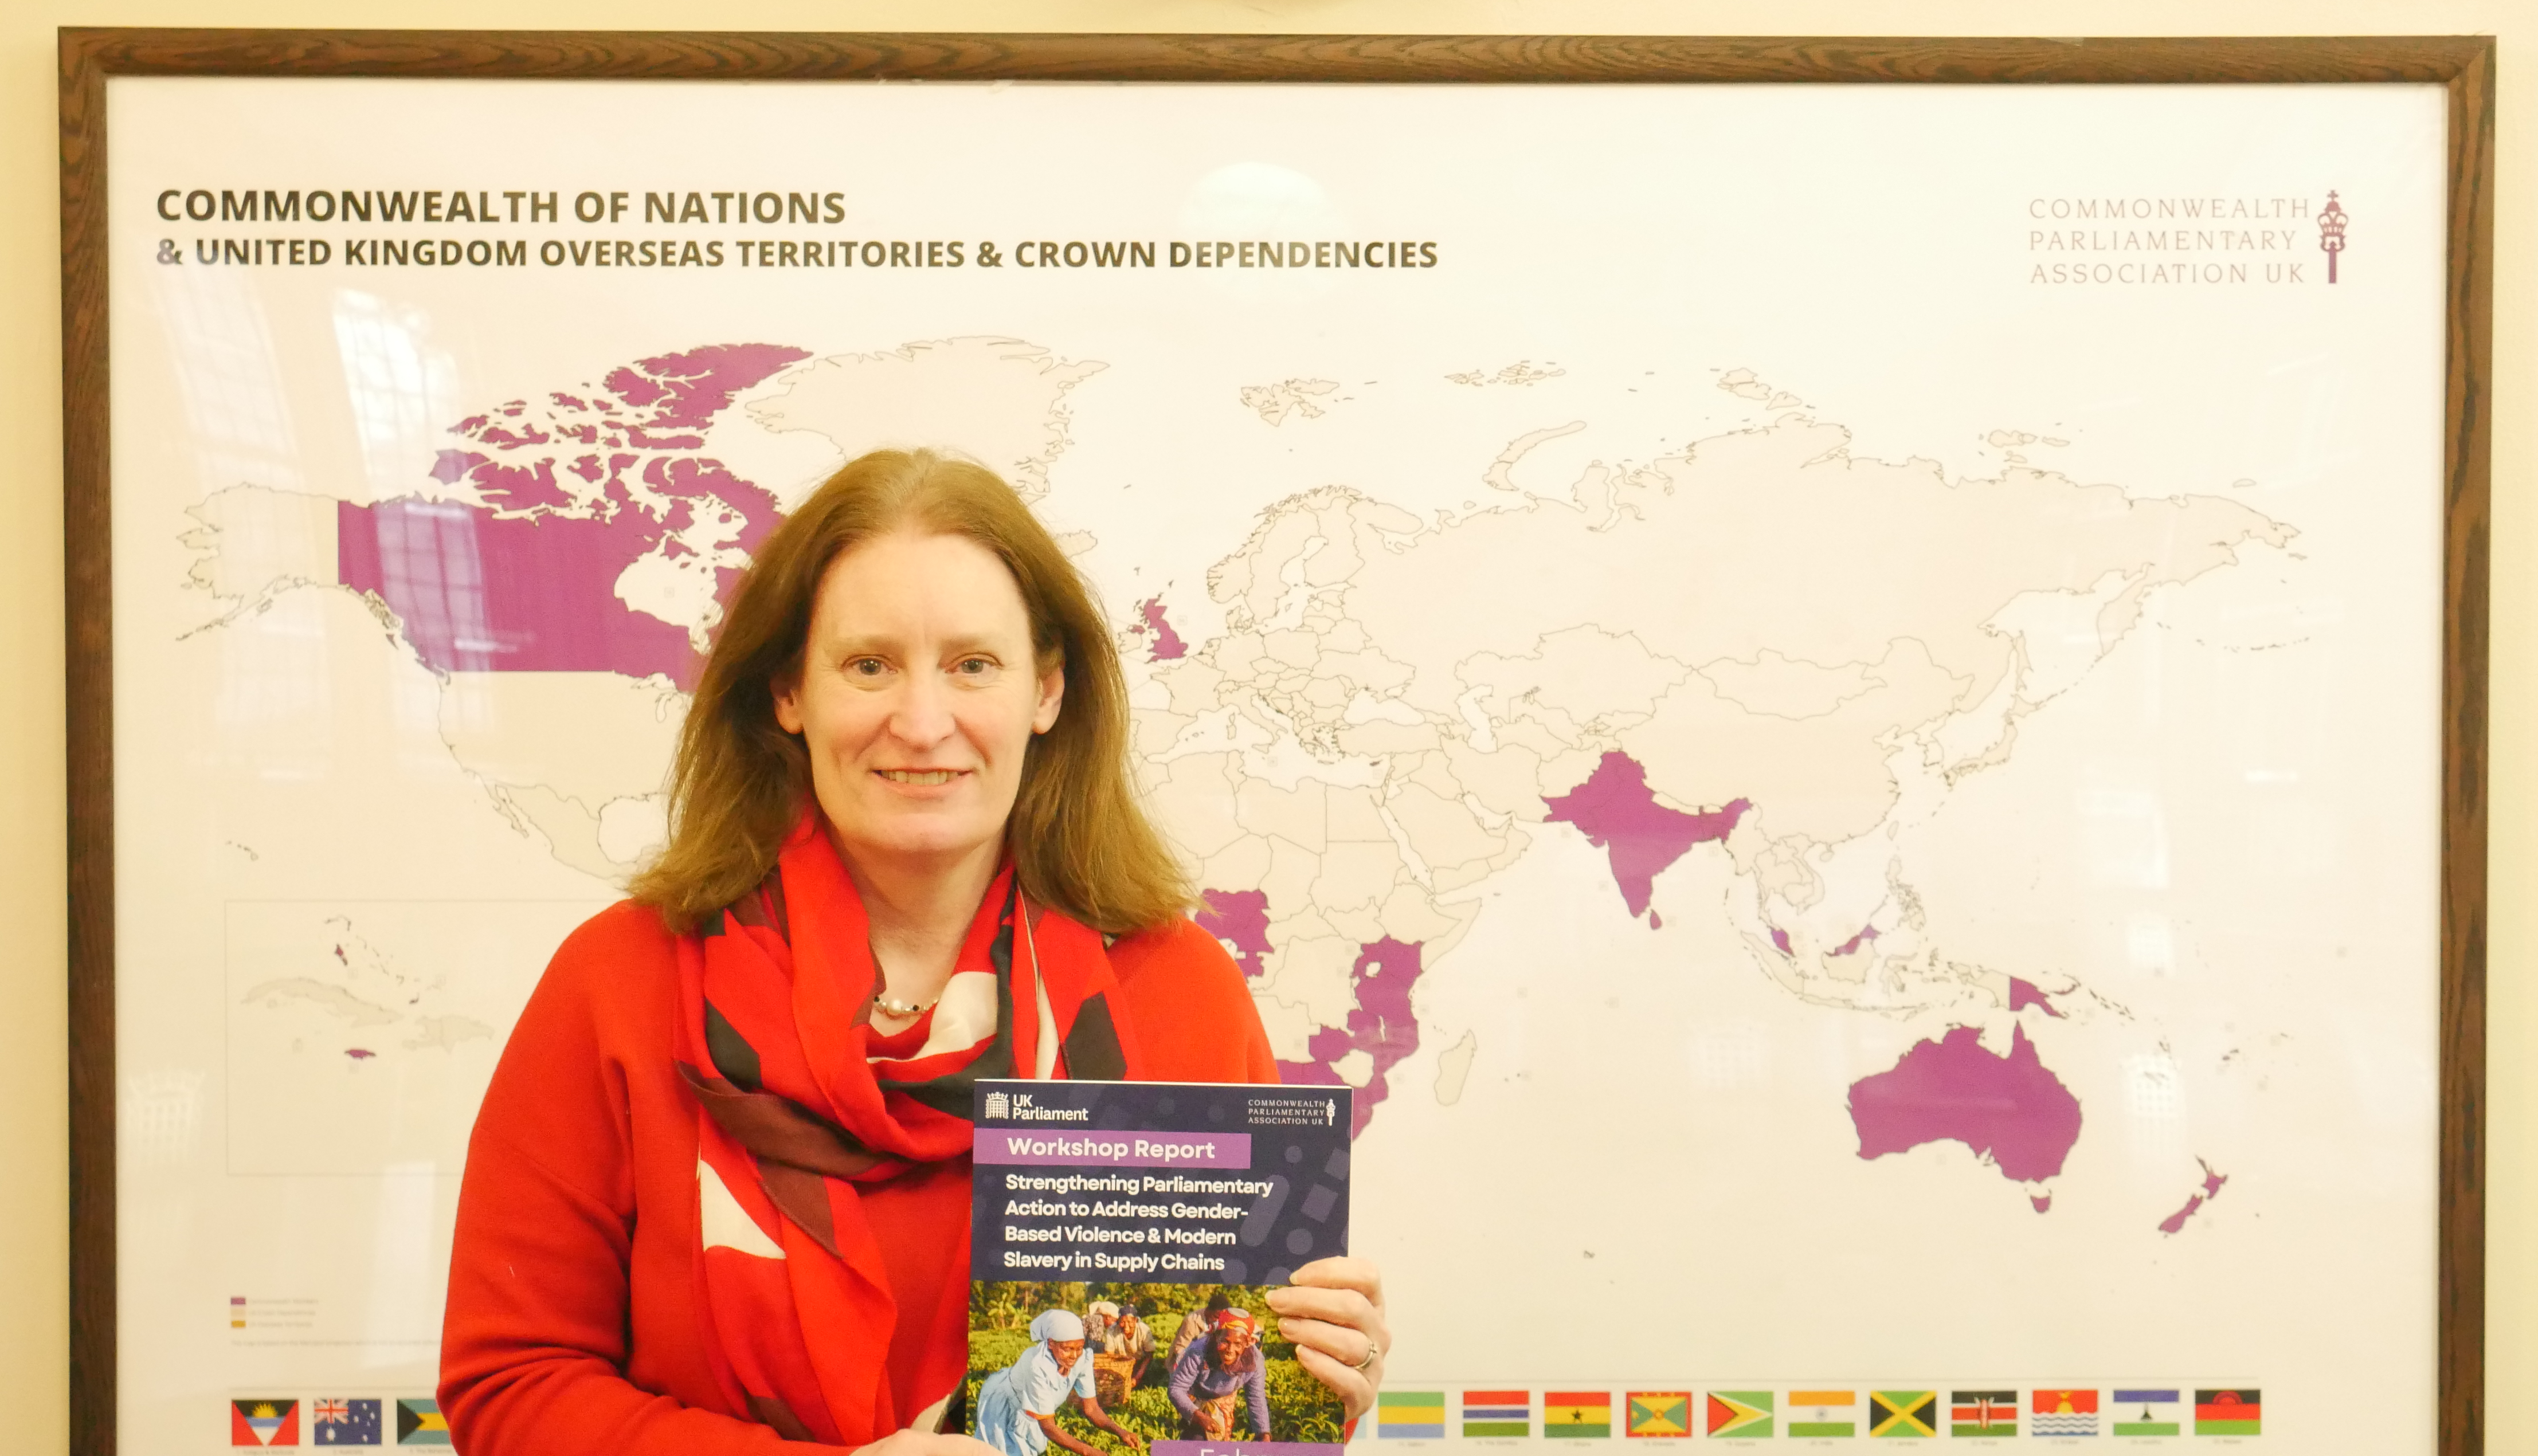 Sarah Dickson, CEO of CPA UK, showcases the new report